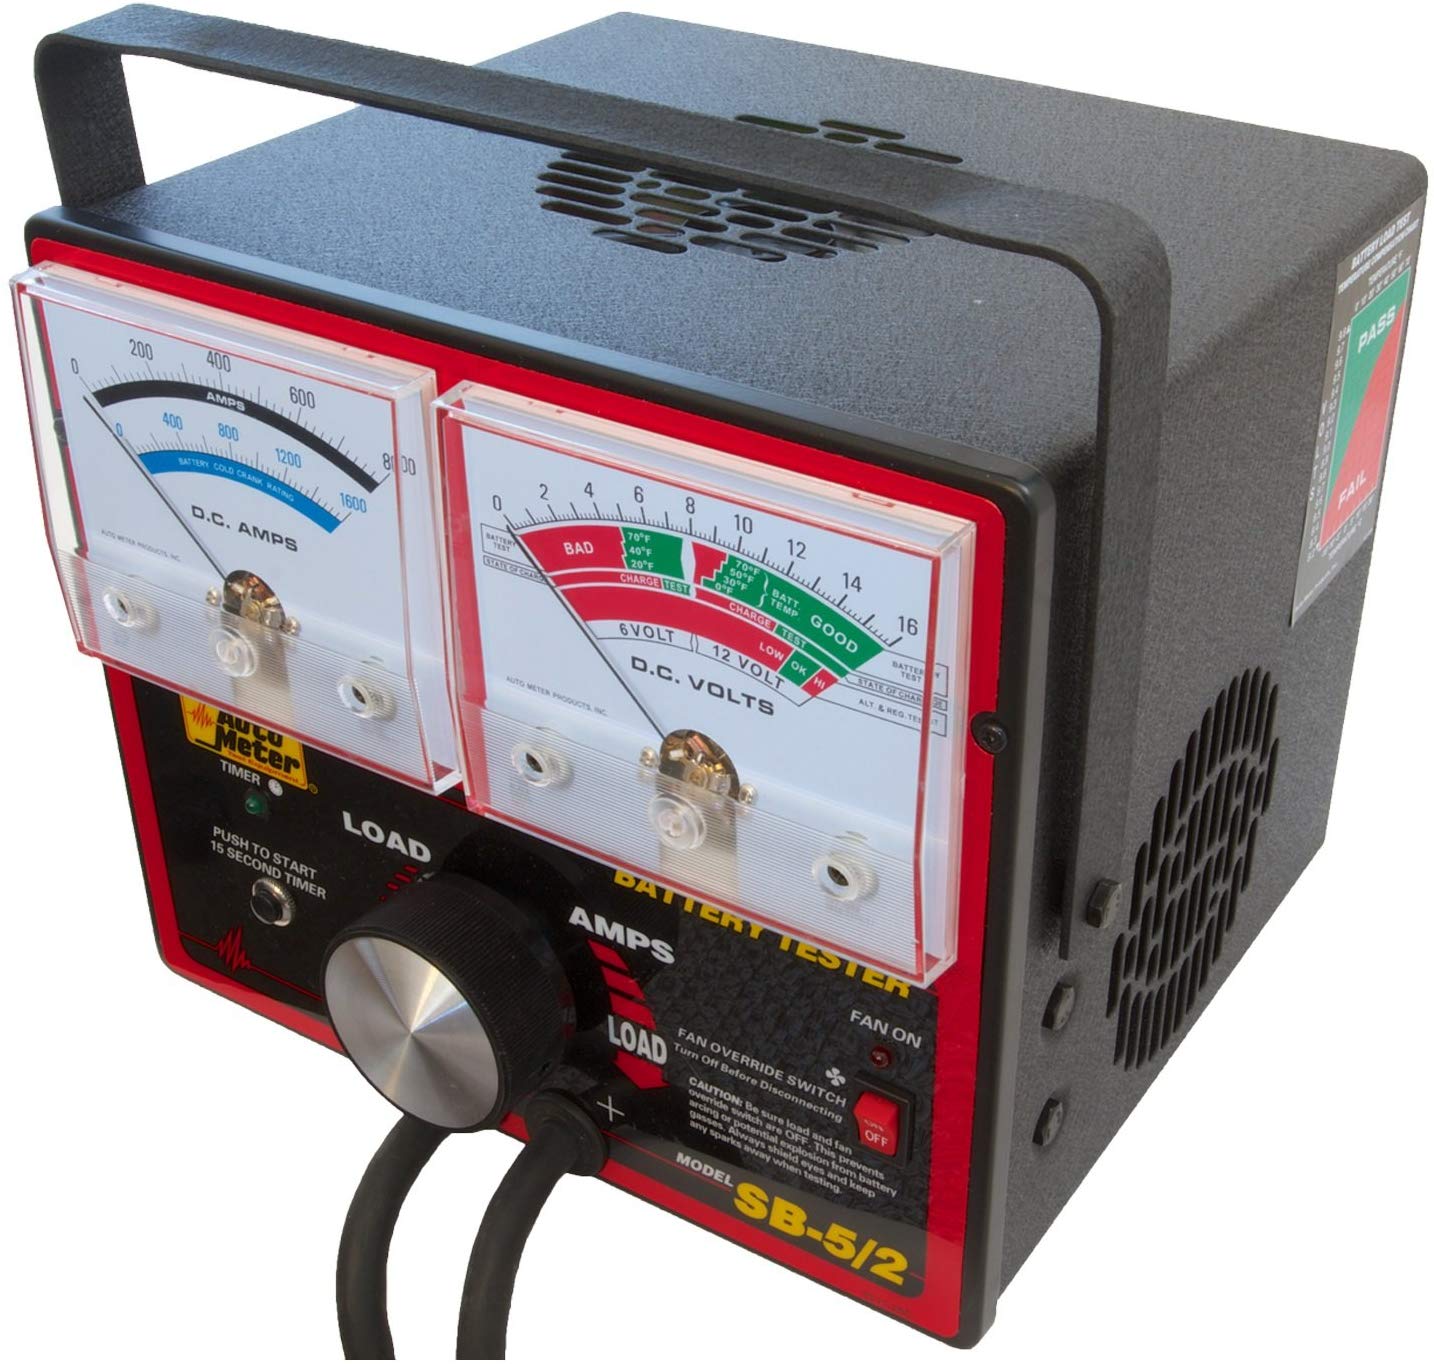 Auto Meter (SB-5/2) 800 Amp Variable Load Battery/Electrical System Tester - MPR Tools & Equipment